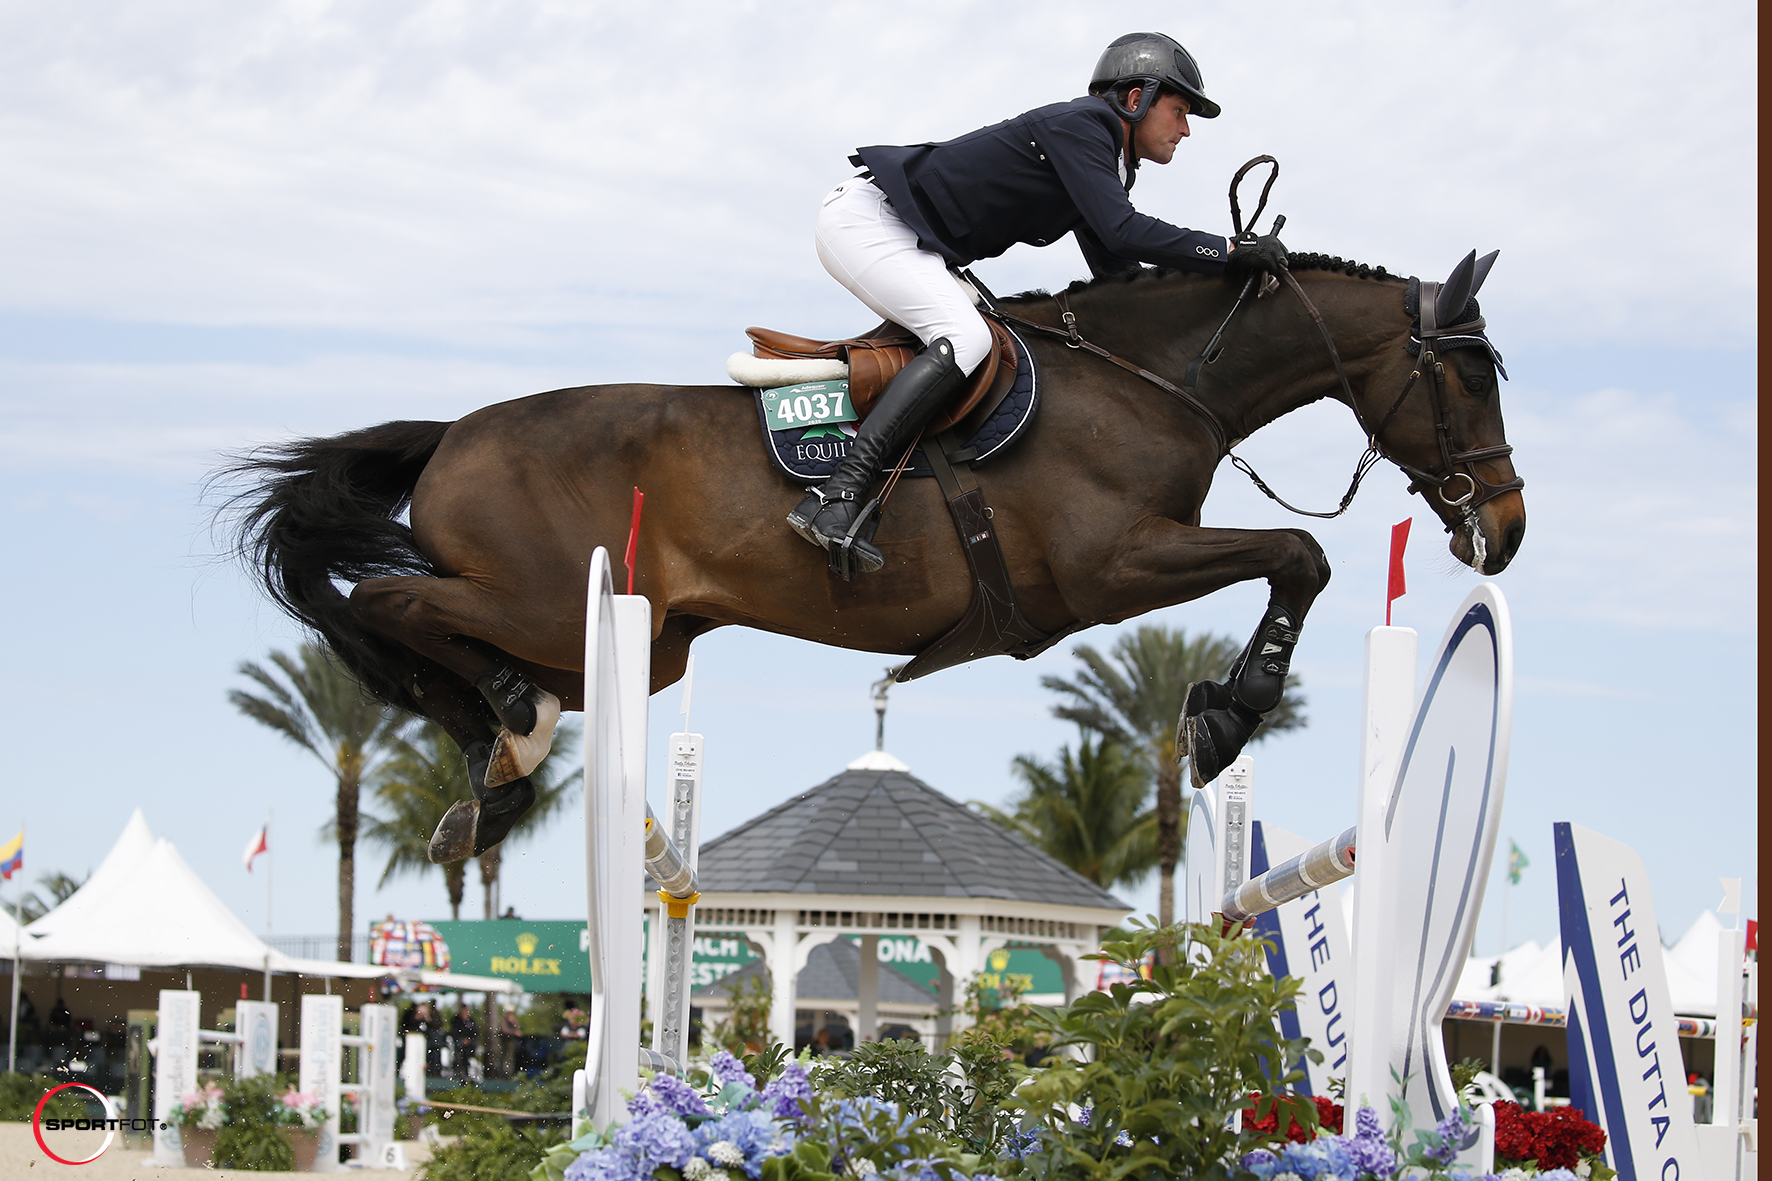 Darragh Kenny Claims Win in WEF Challenge Cup CSIO4*